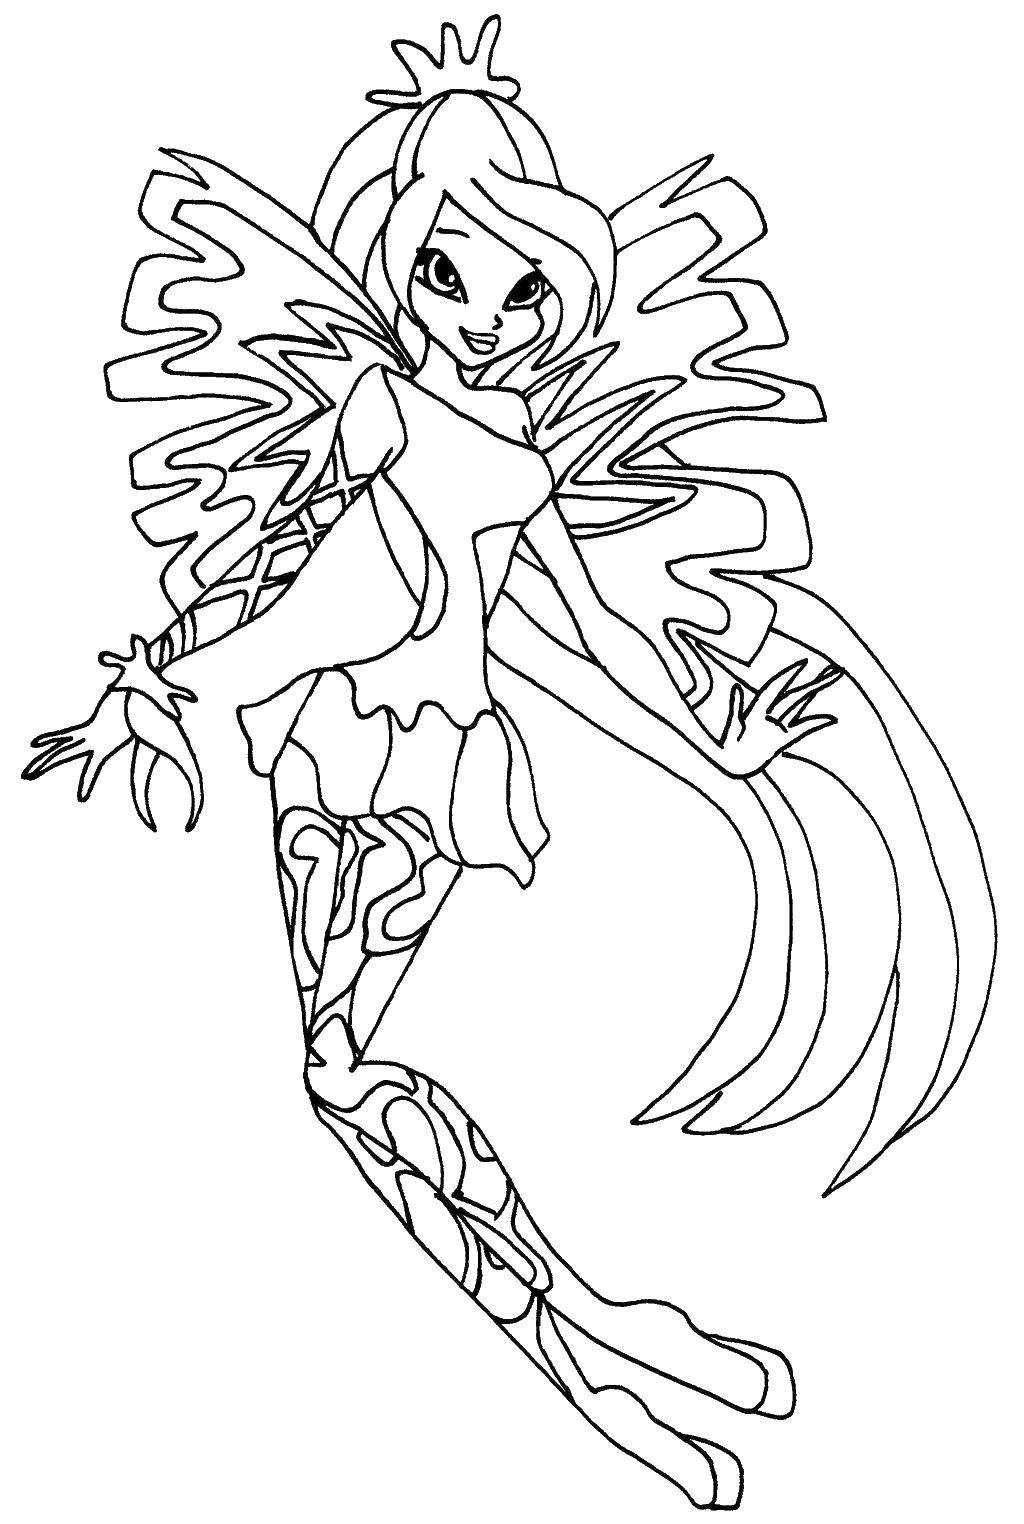 Coloring Bloom fairy. Category Winx club. Tags:  Cartoon character.